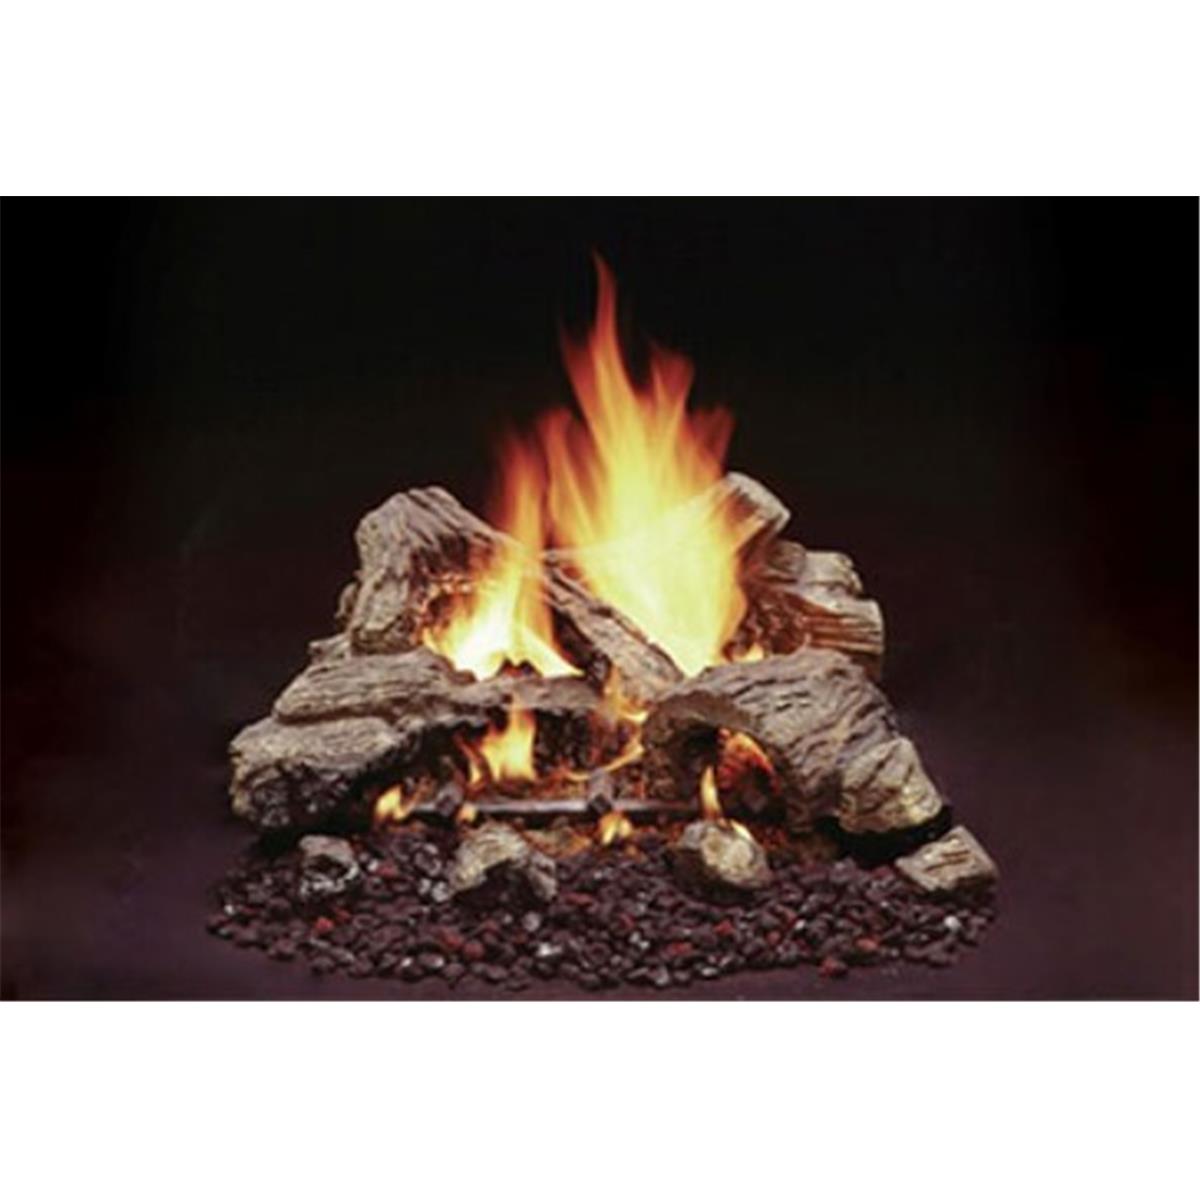 Picture of Majestic VDY24-18D2A 17 in. Fiber Ceramic Log Set for Rear Log & Narrow Back Fireplaces - 4 Piece